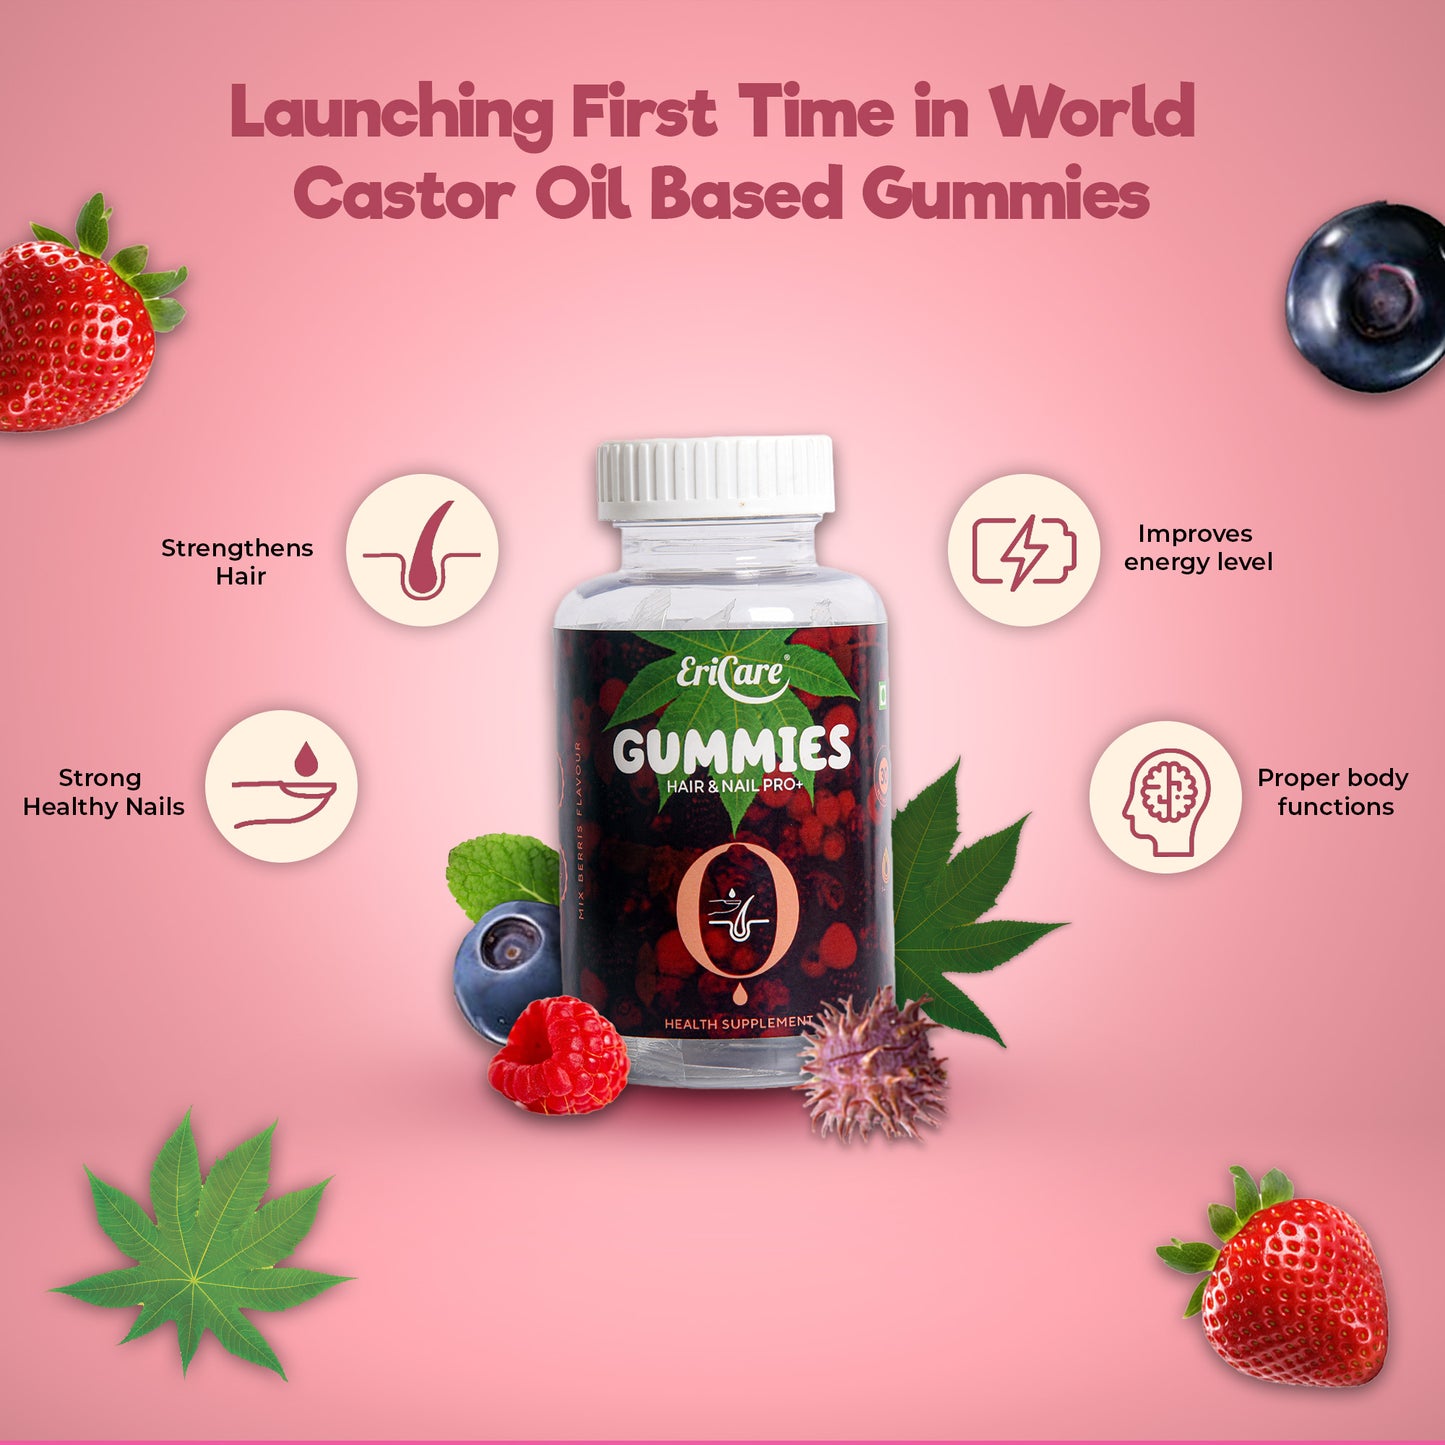 World's first castor oil based gummies for hair and nail